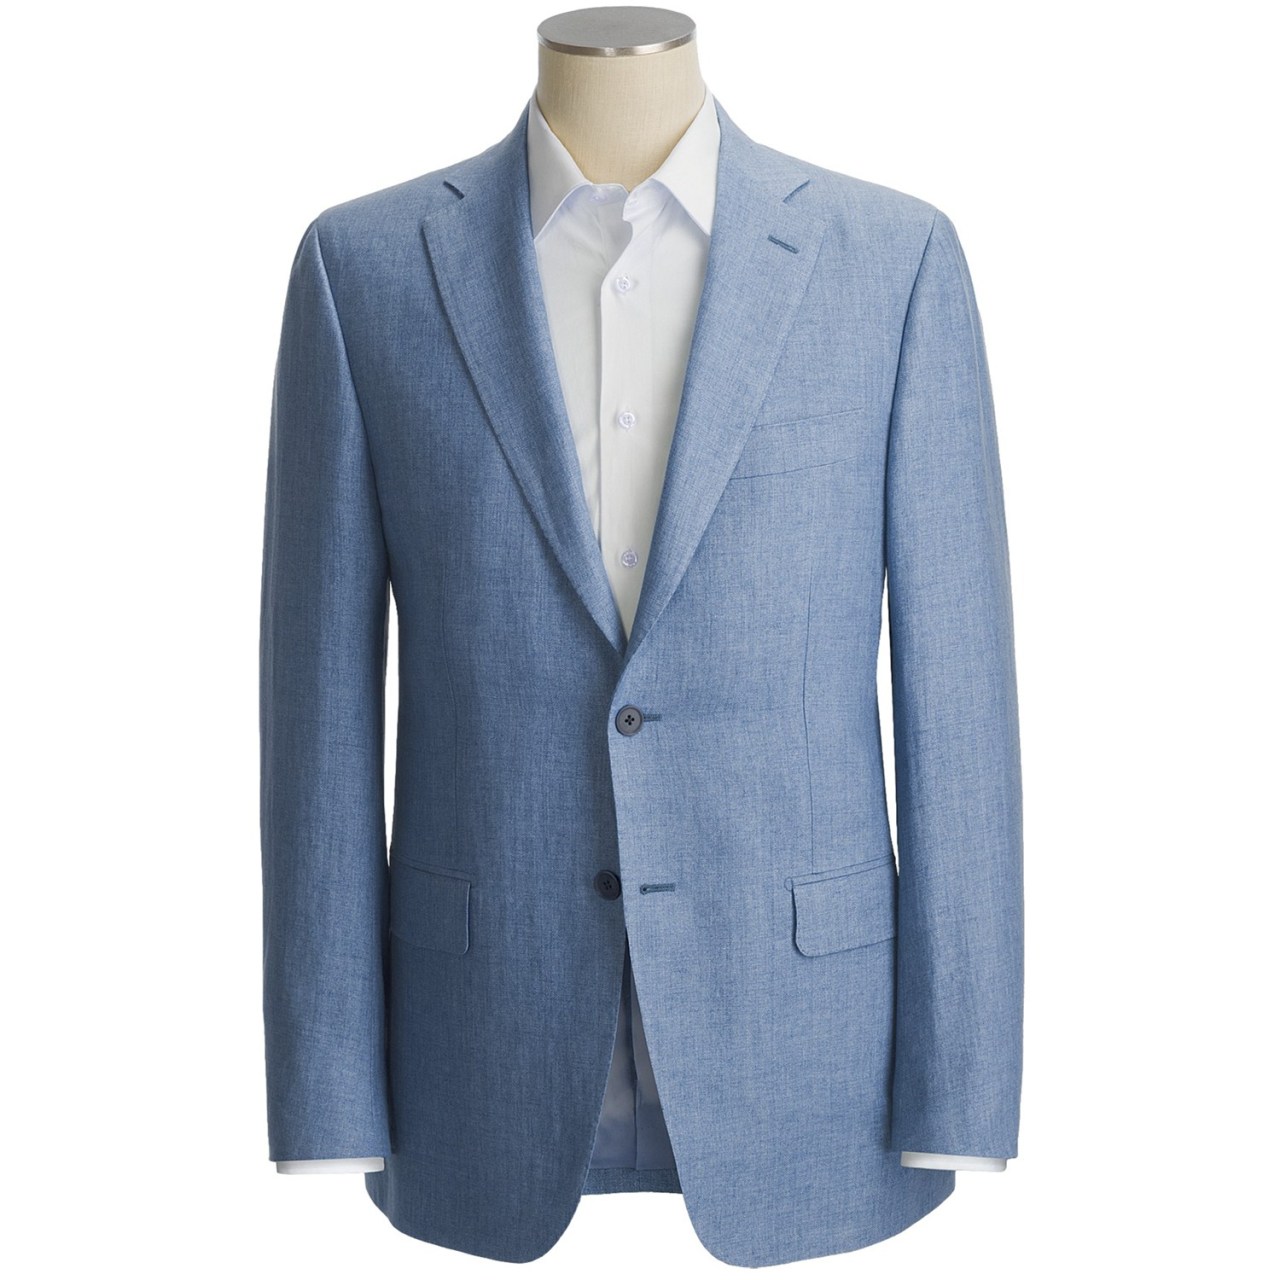 It’s On Sale: Isaia at STP